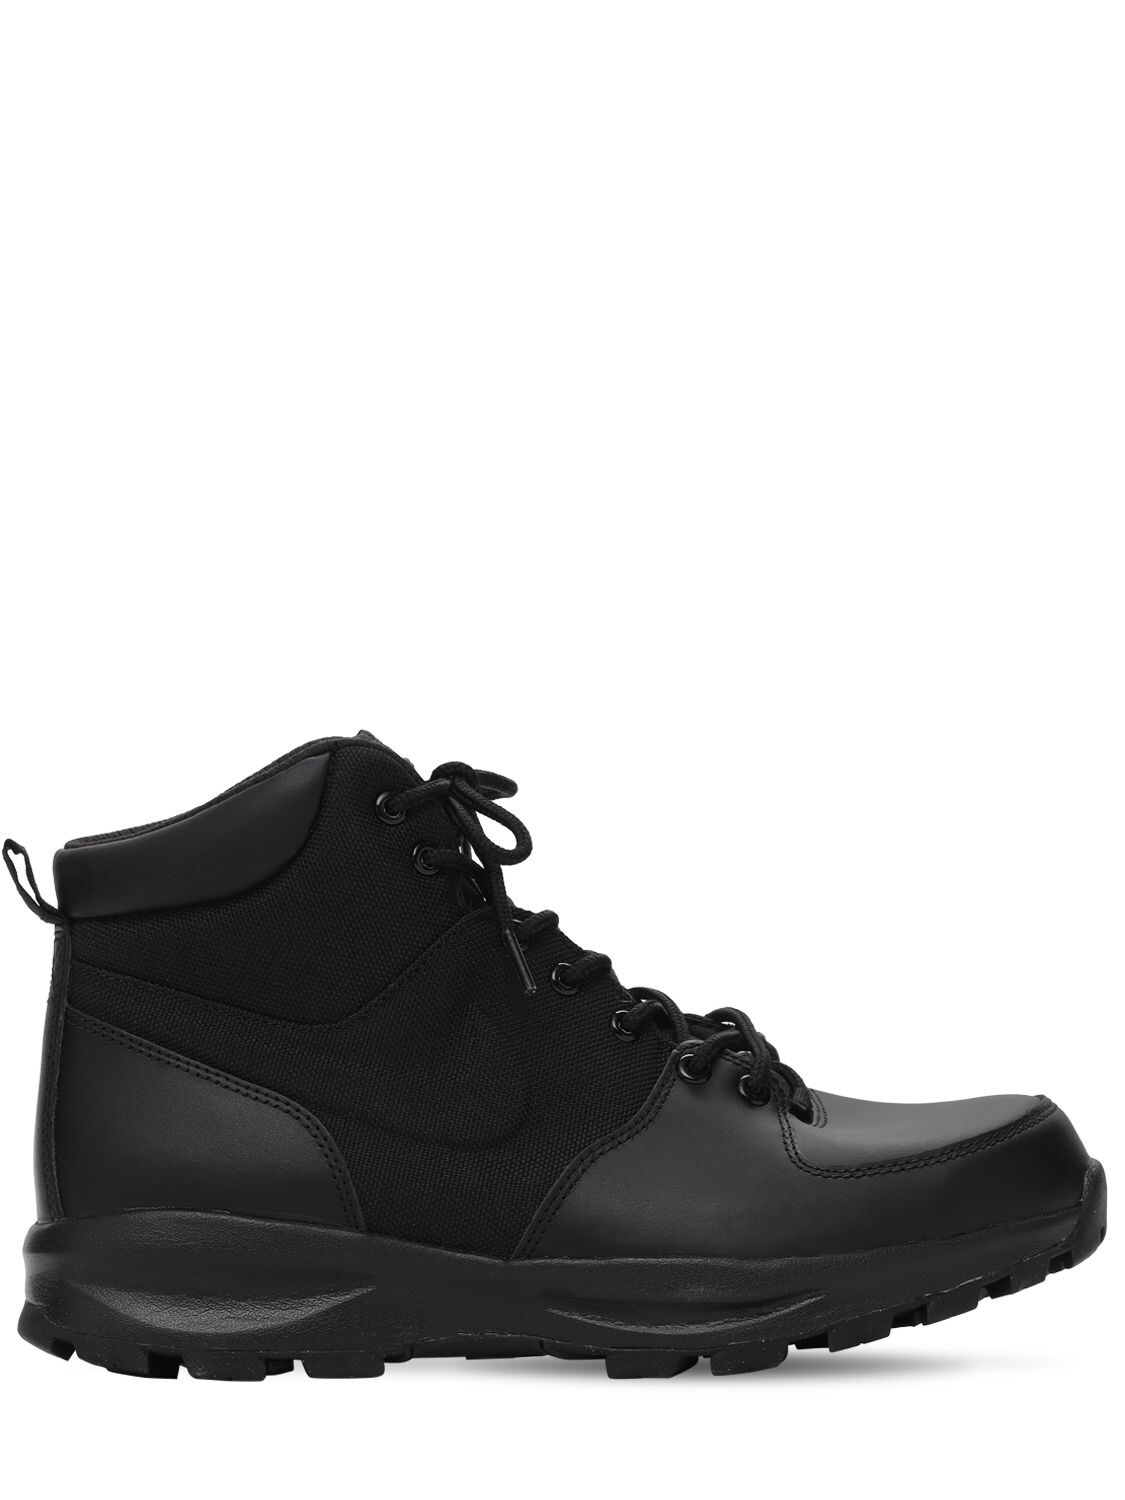 Nike Manoa Boots In Black